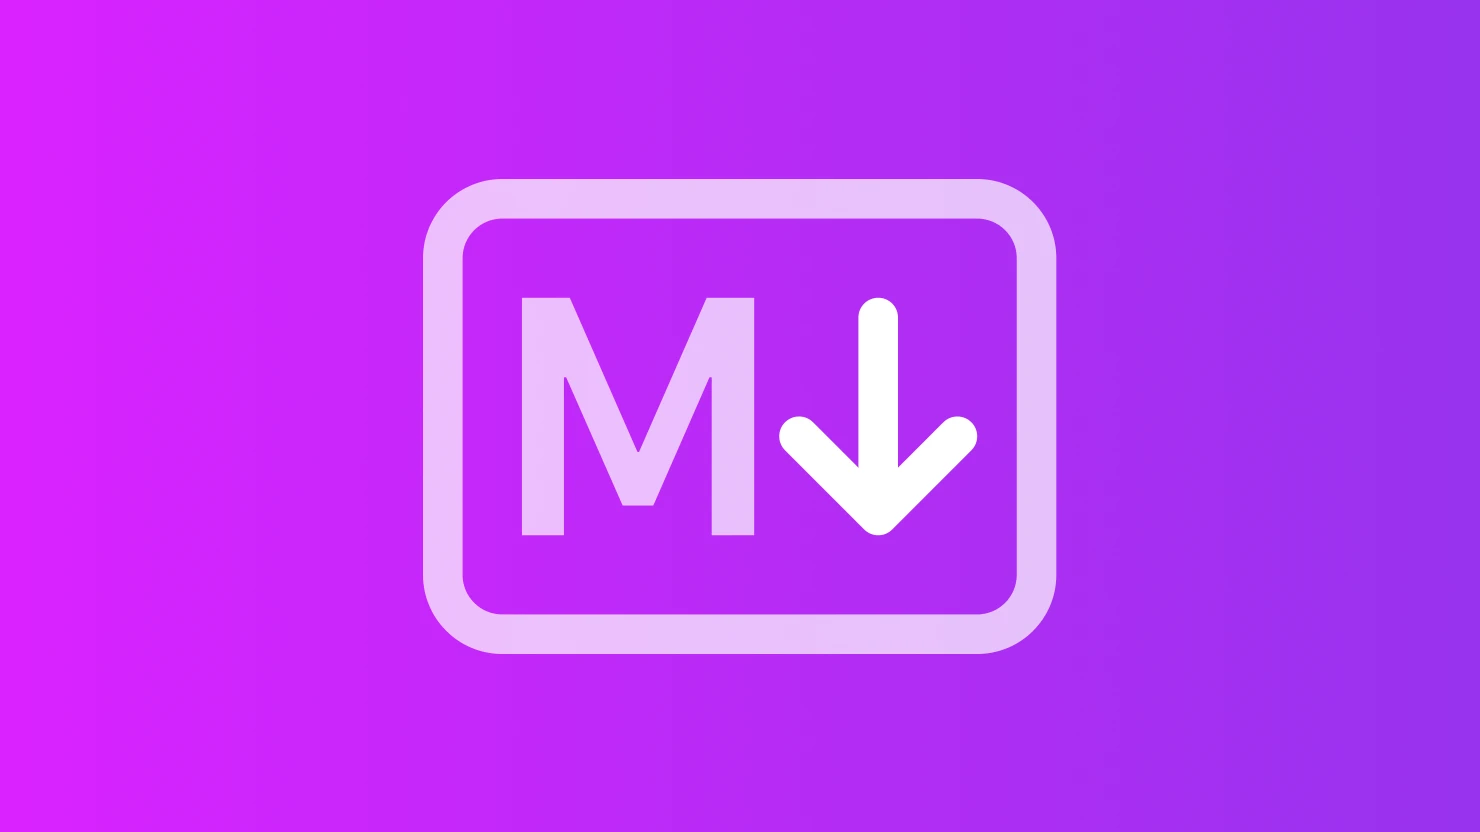 A stylized representation of a markdown icon.